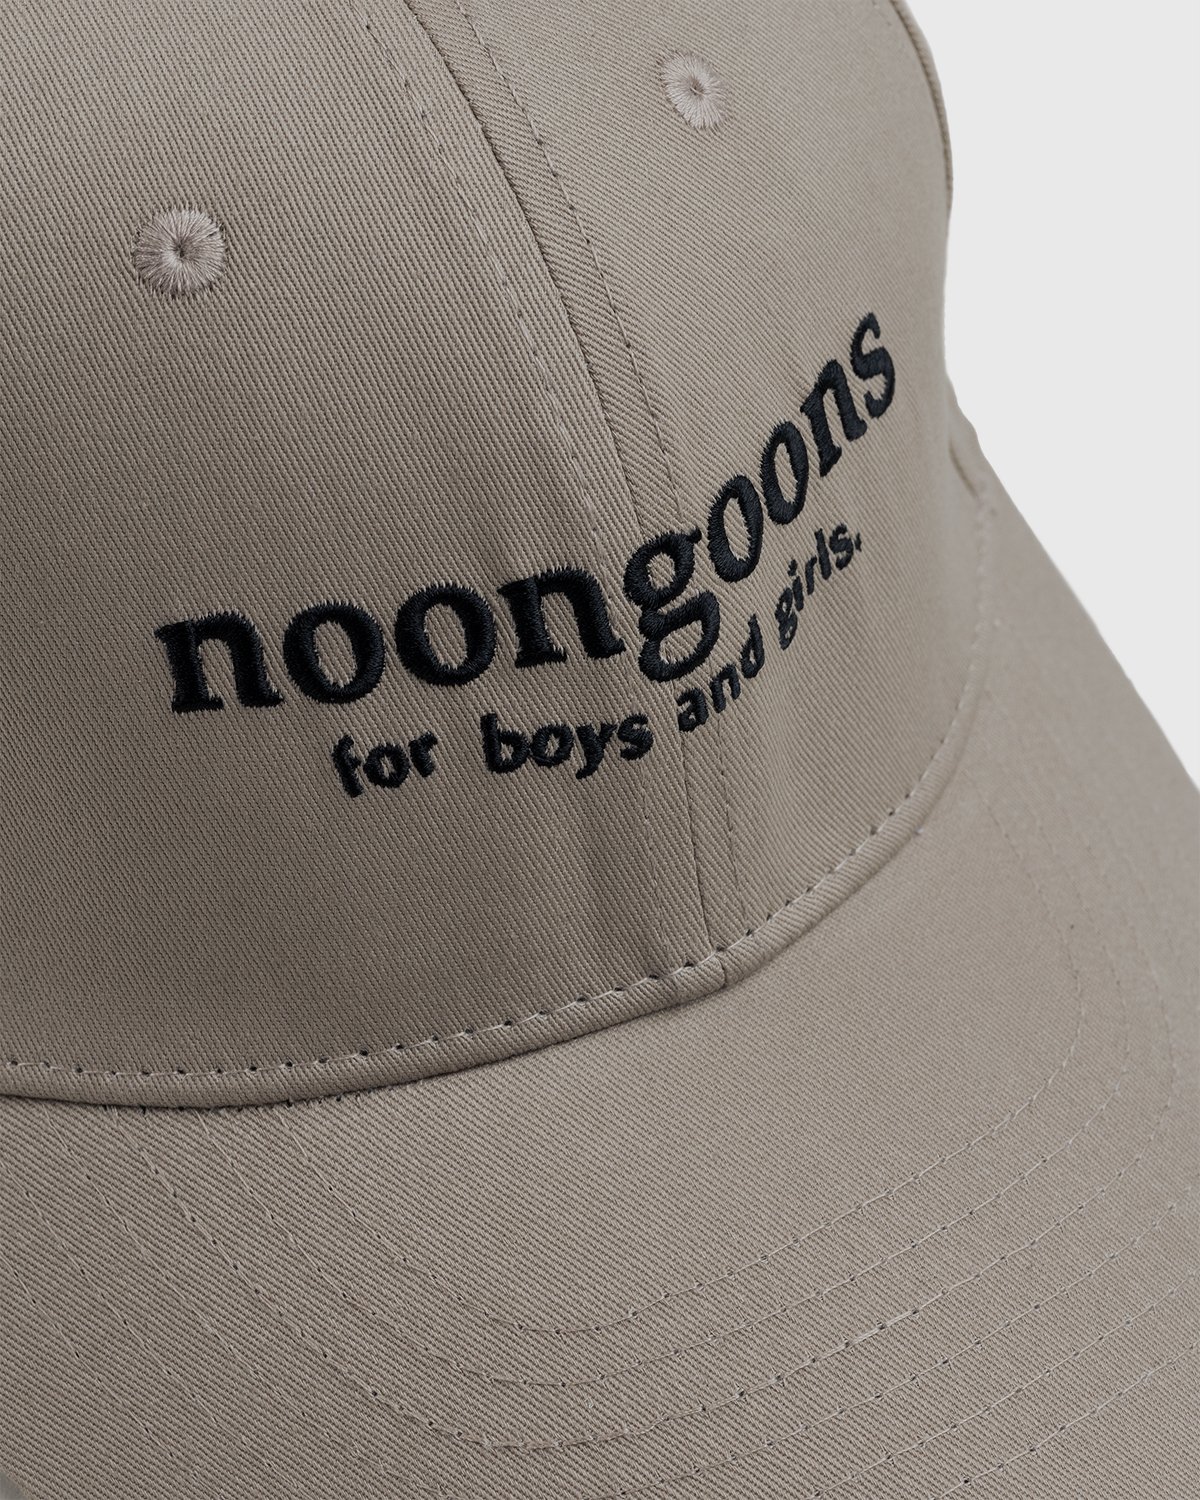 Noon Goons - Boys and Girls Hat Stone - Accessories - White - Image 6